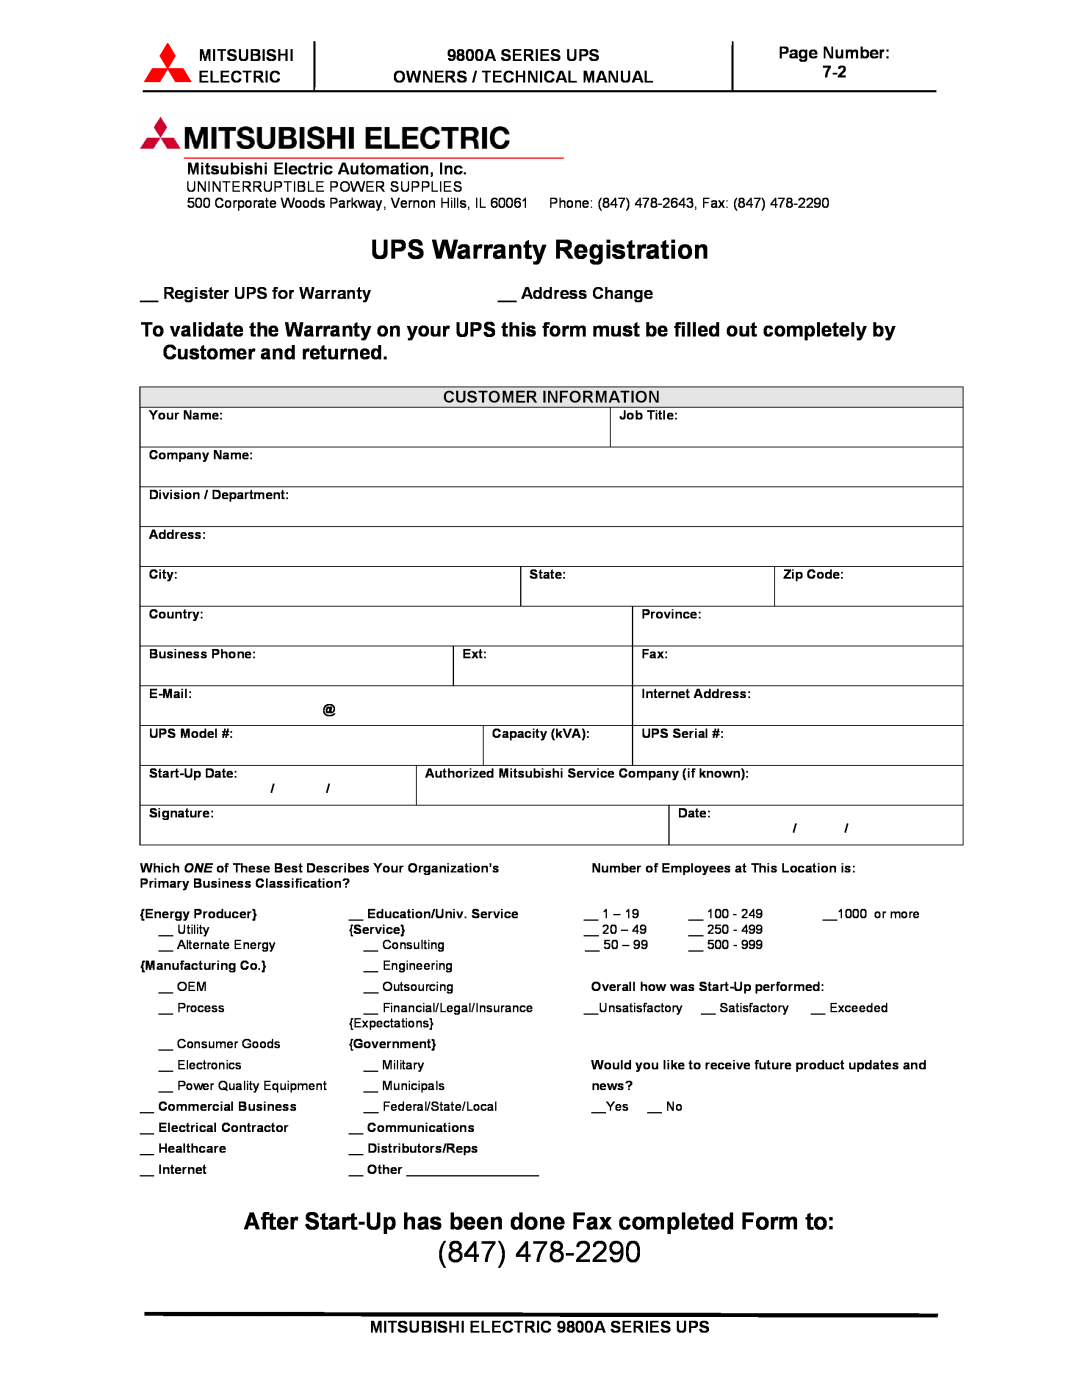 Mitsubishi 9800A Series technical manual UPS Warranty Registration, After Start-Up has been done Fax completed Form to 